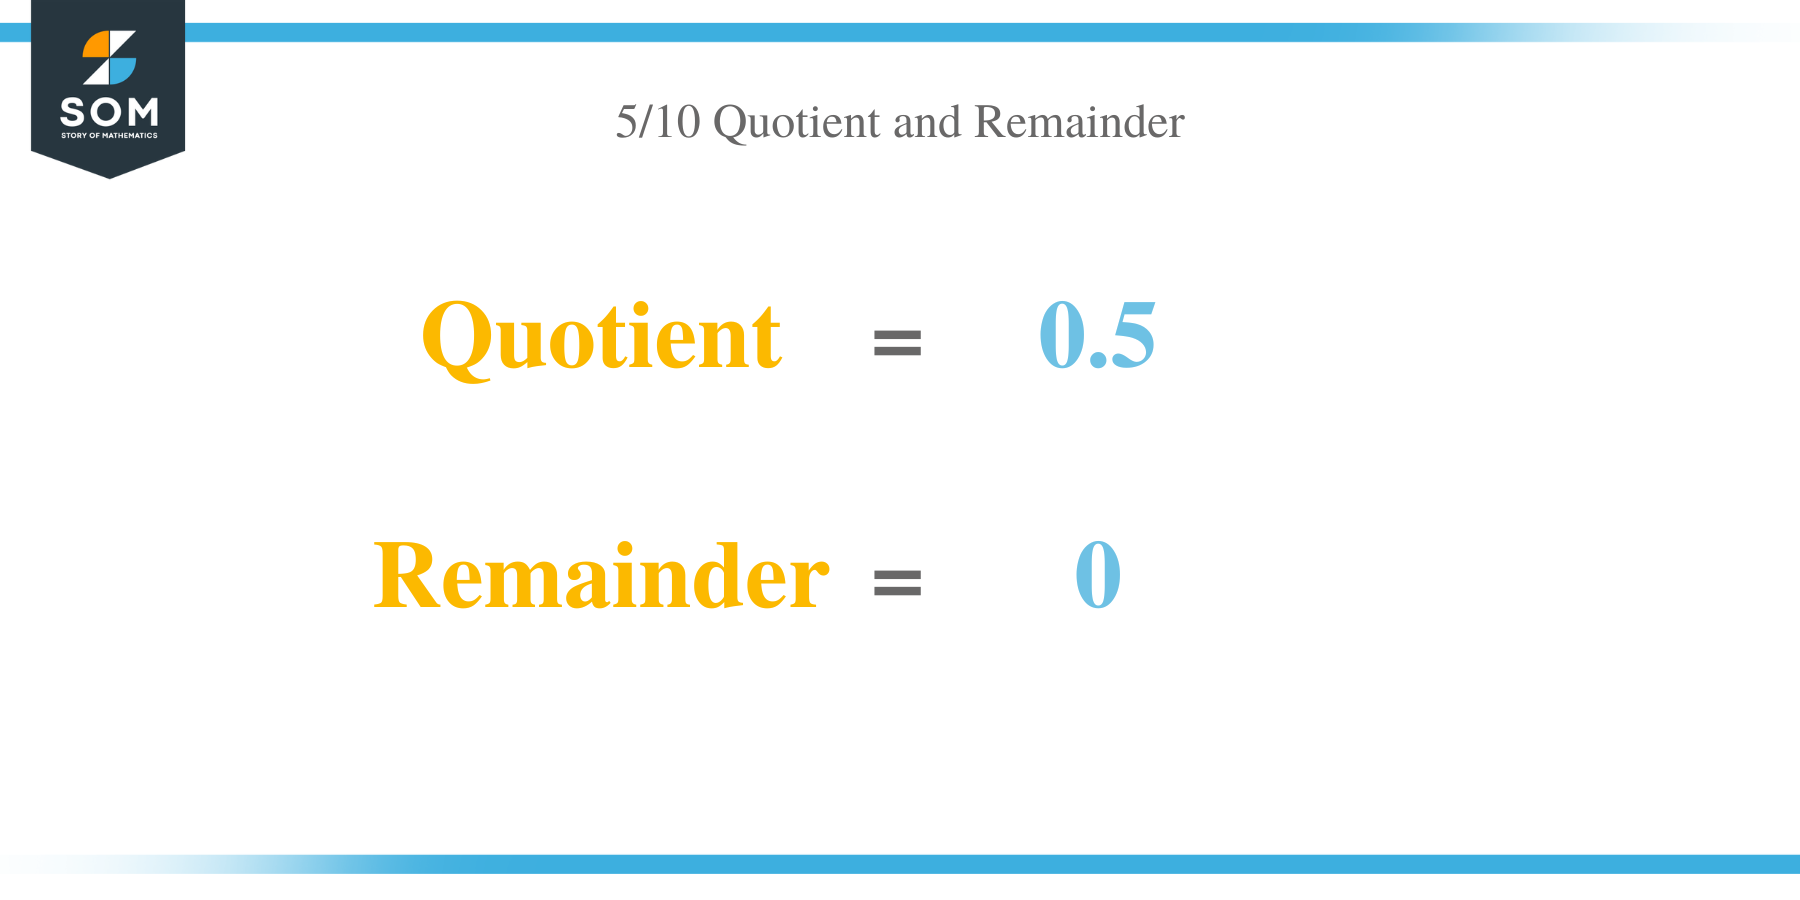 Quotient and Remainer of 5 per 10